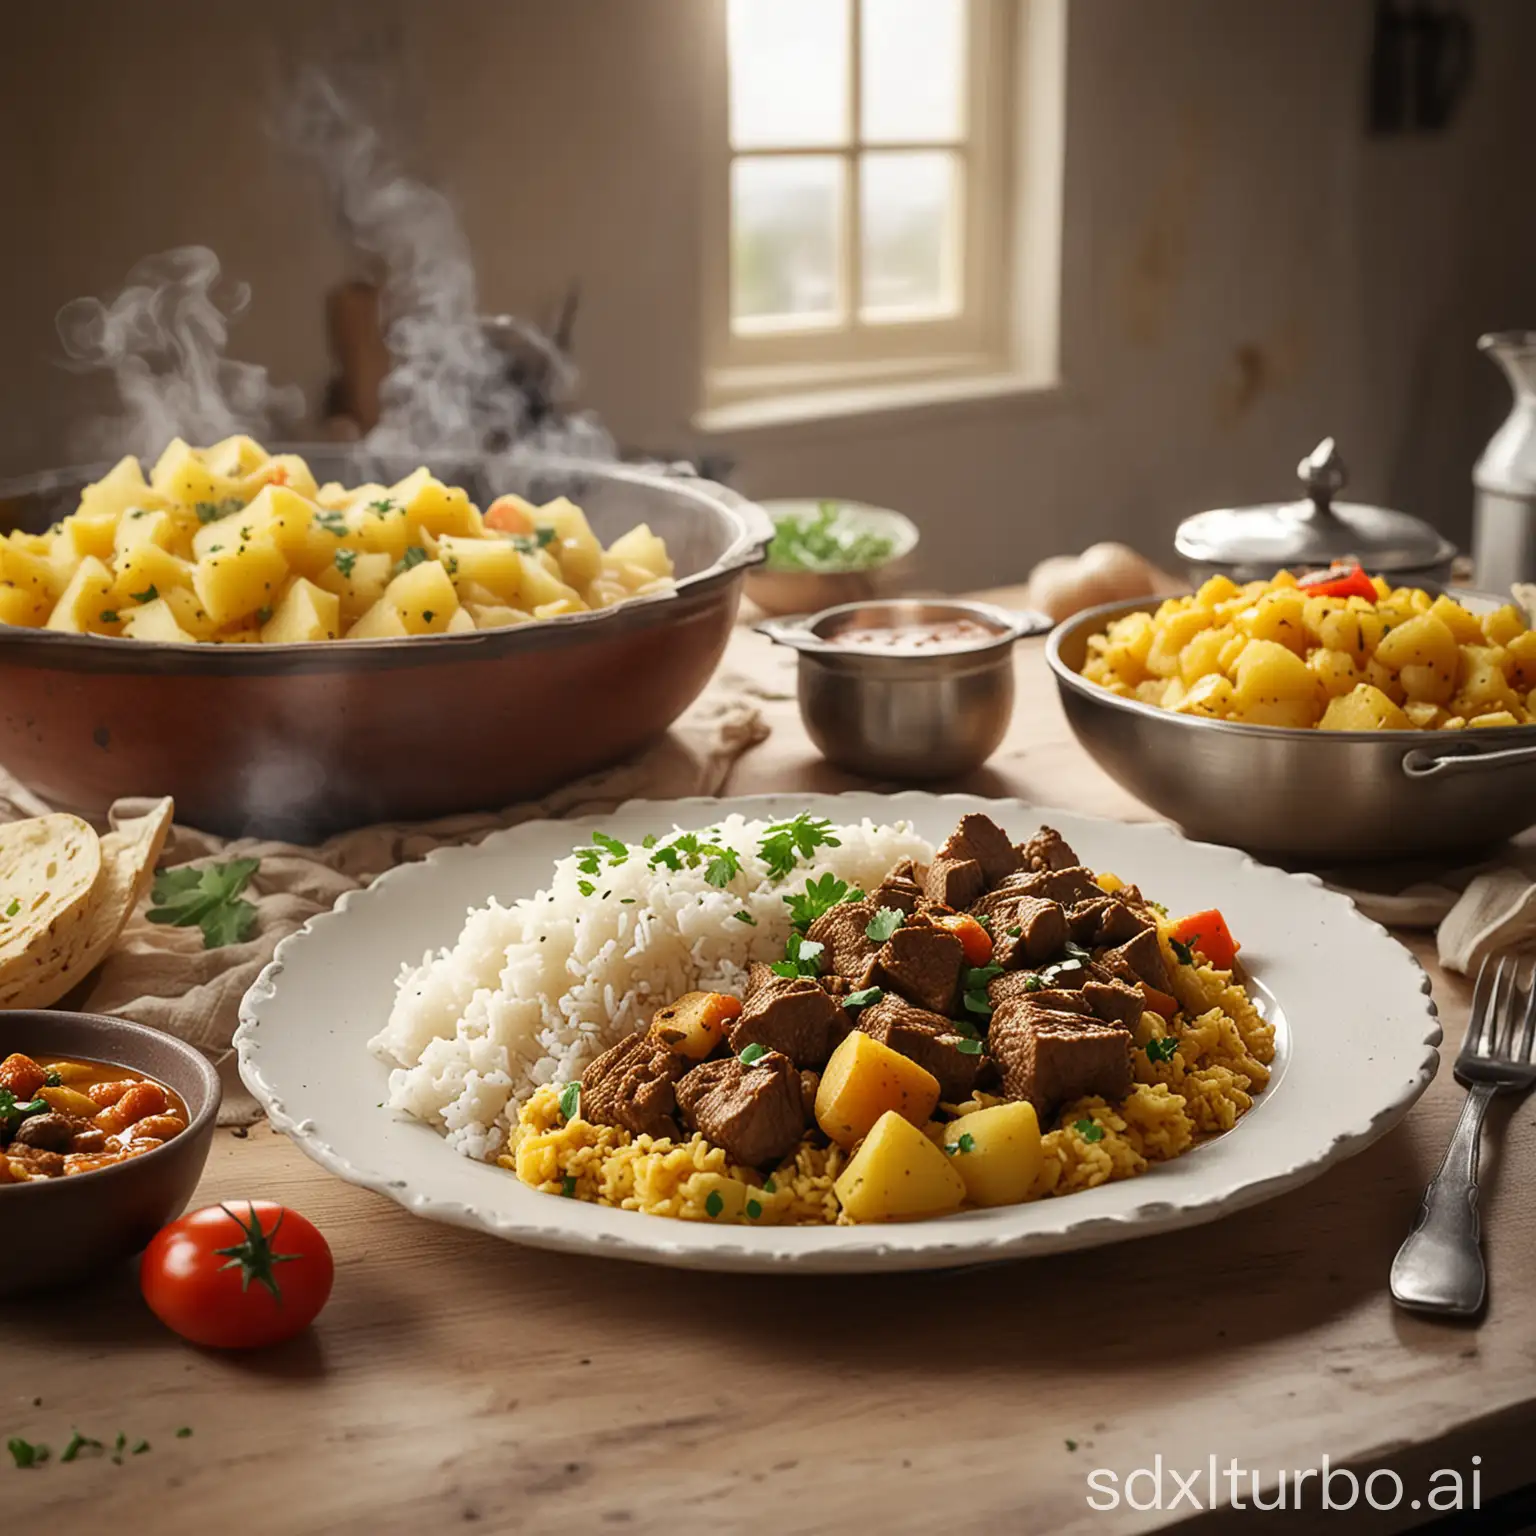 A plate of steaming potato curry with beef and rice, and some ingredients, against the backdrop of a bright kitchen island, perfect timing, very real light and texture, a work of food photography.